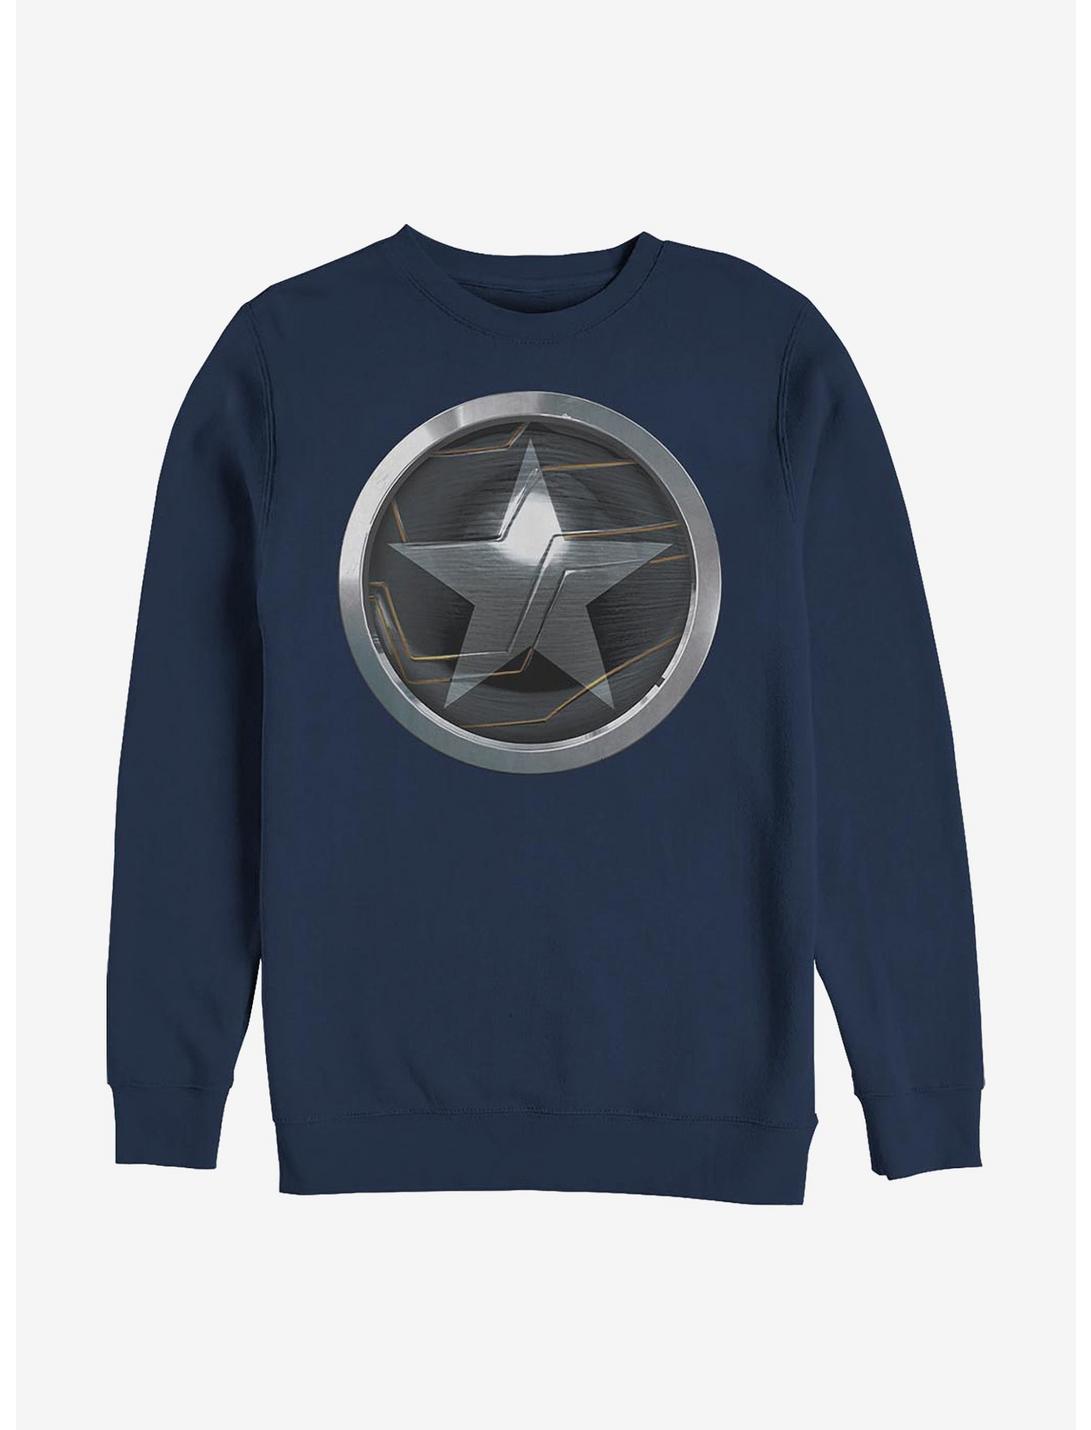 Marvel The Falcon And The Winter Soldier Soldier Logo Sweatshirt, NAVY, hi-res